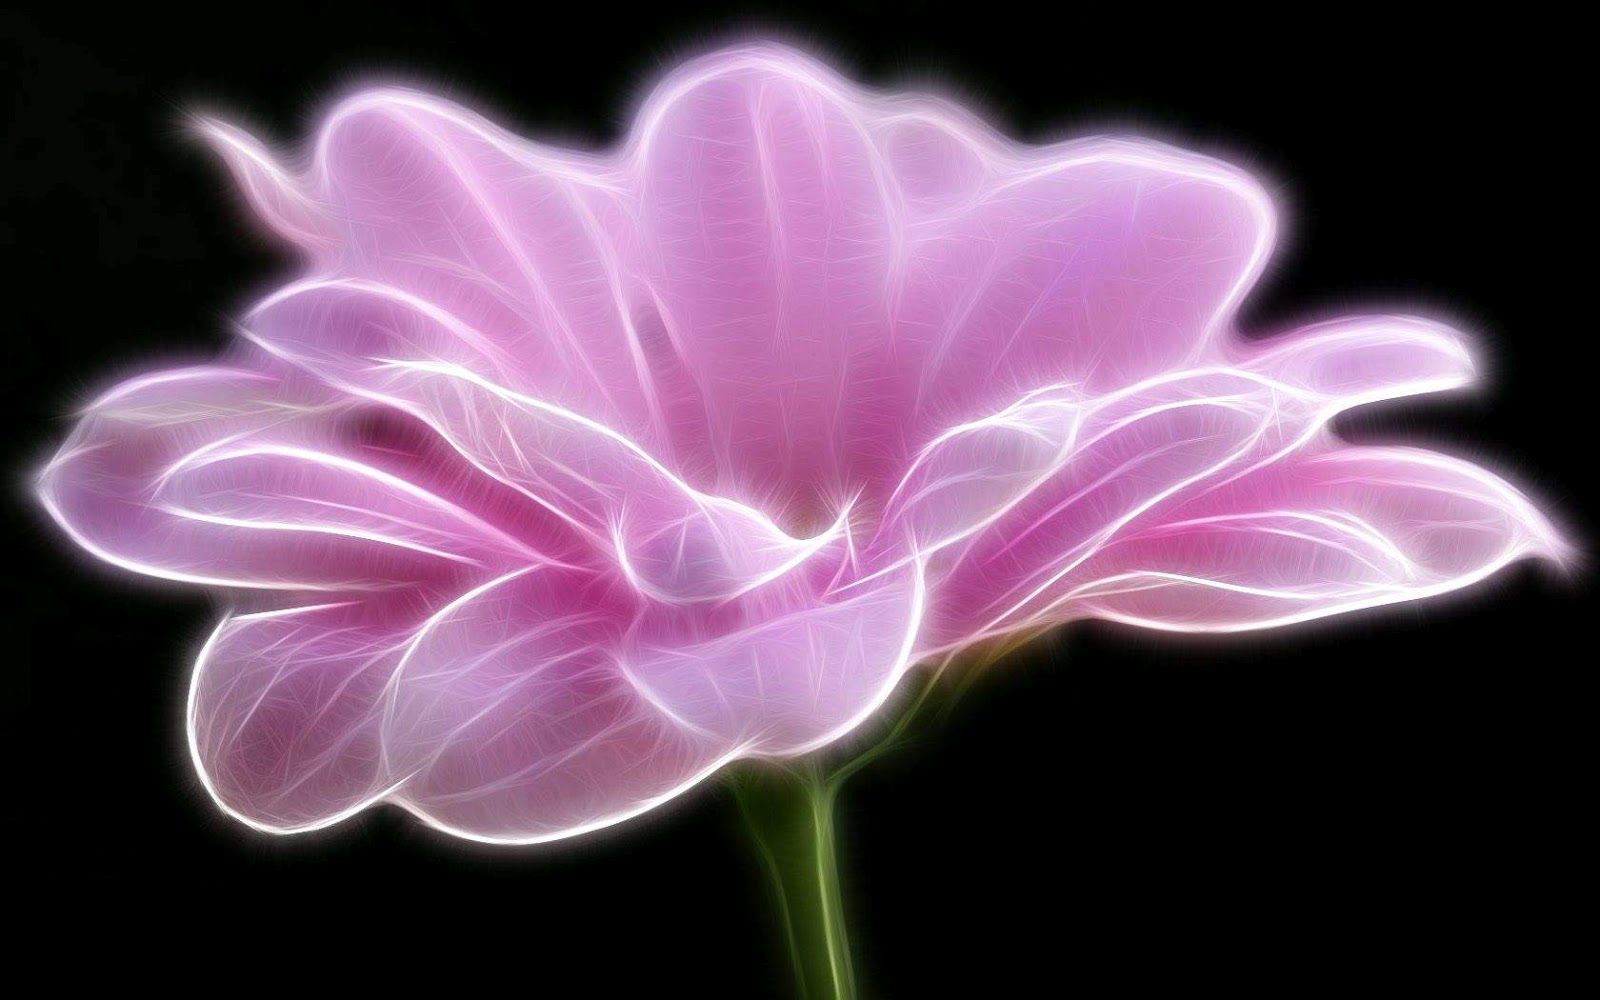 Black and White Wallpapers: Artistic Pink Flower Wallpaper